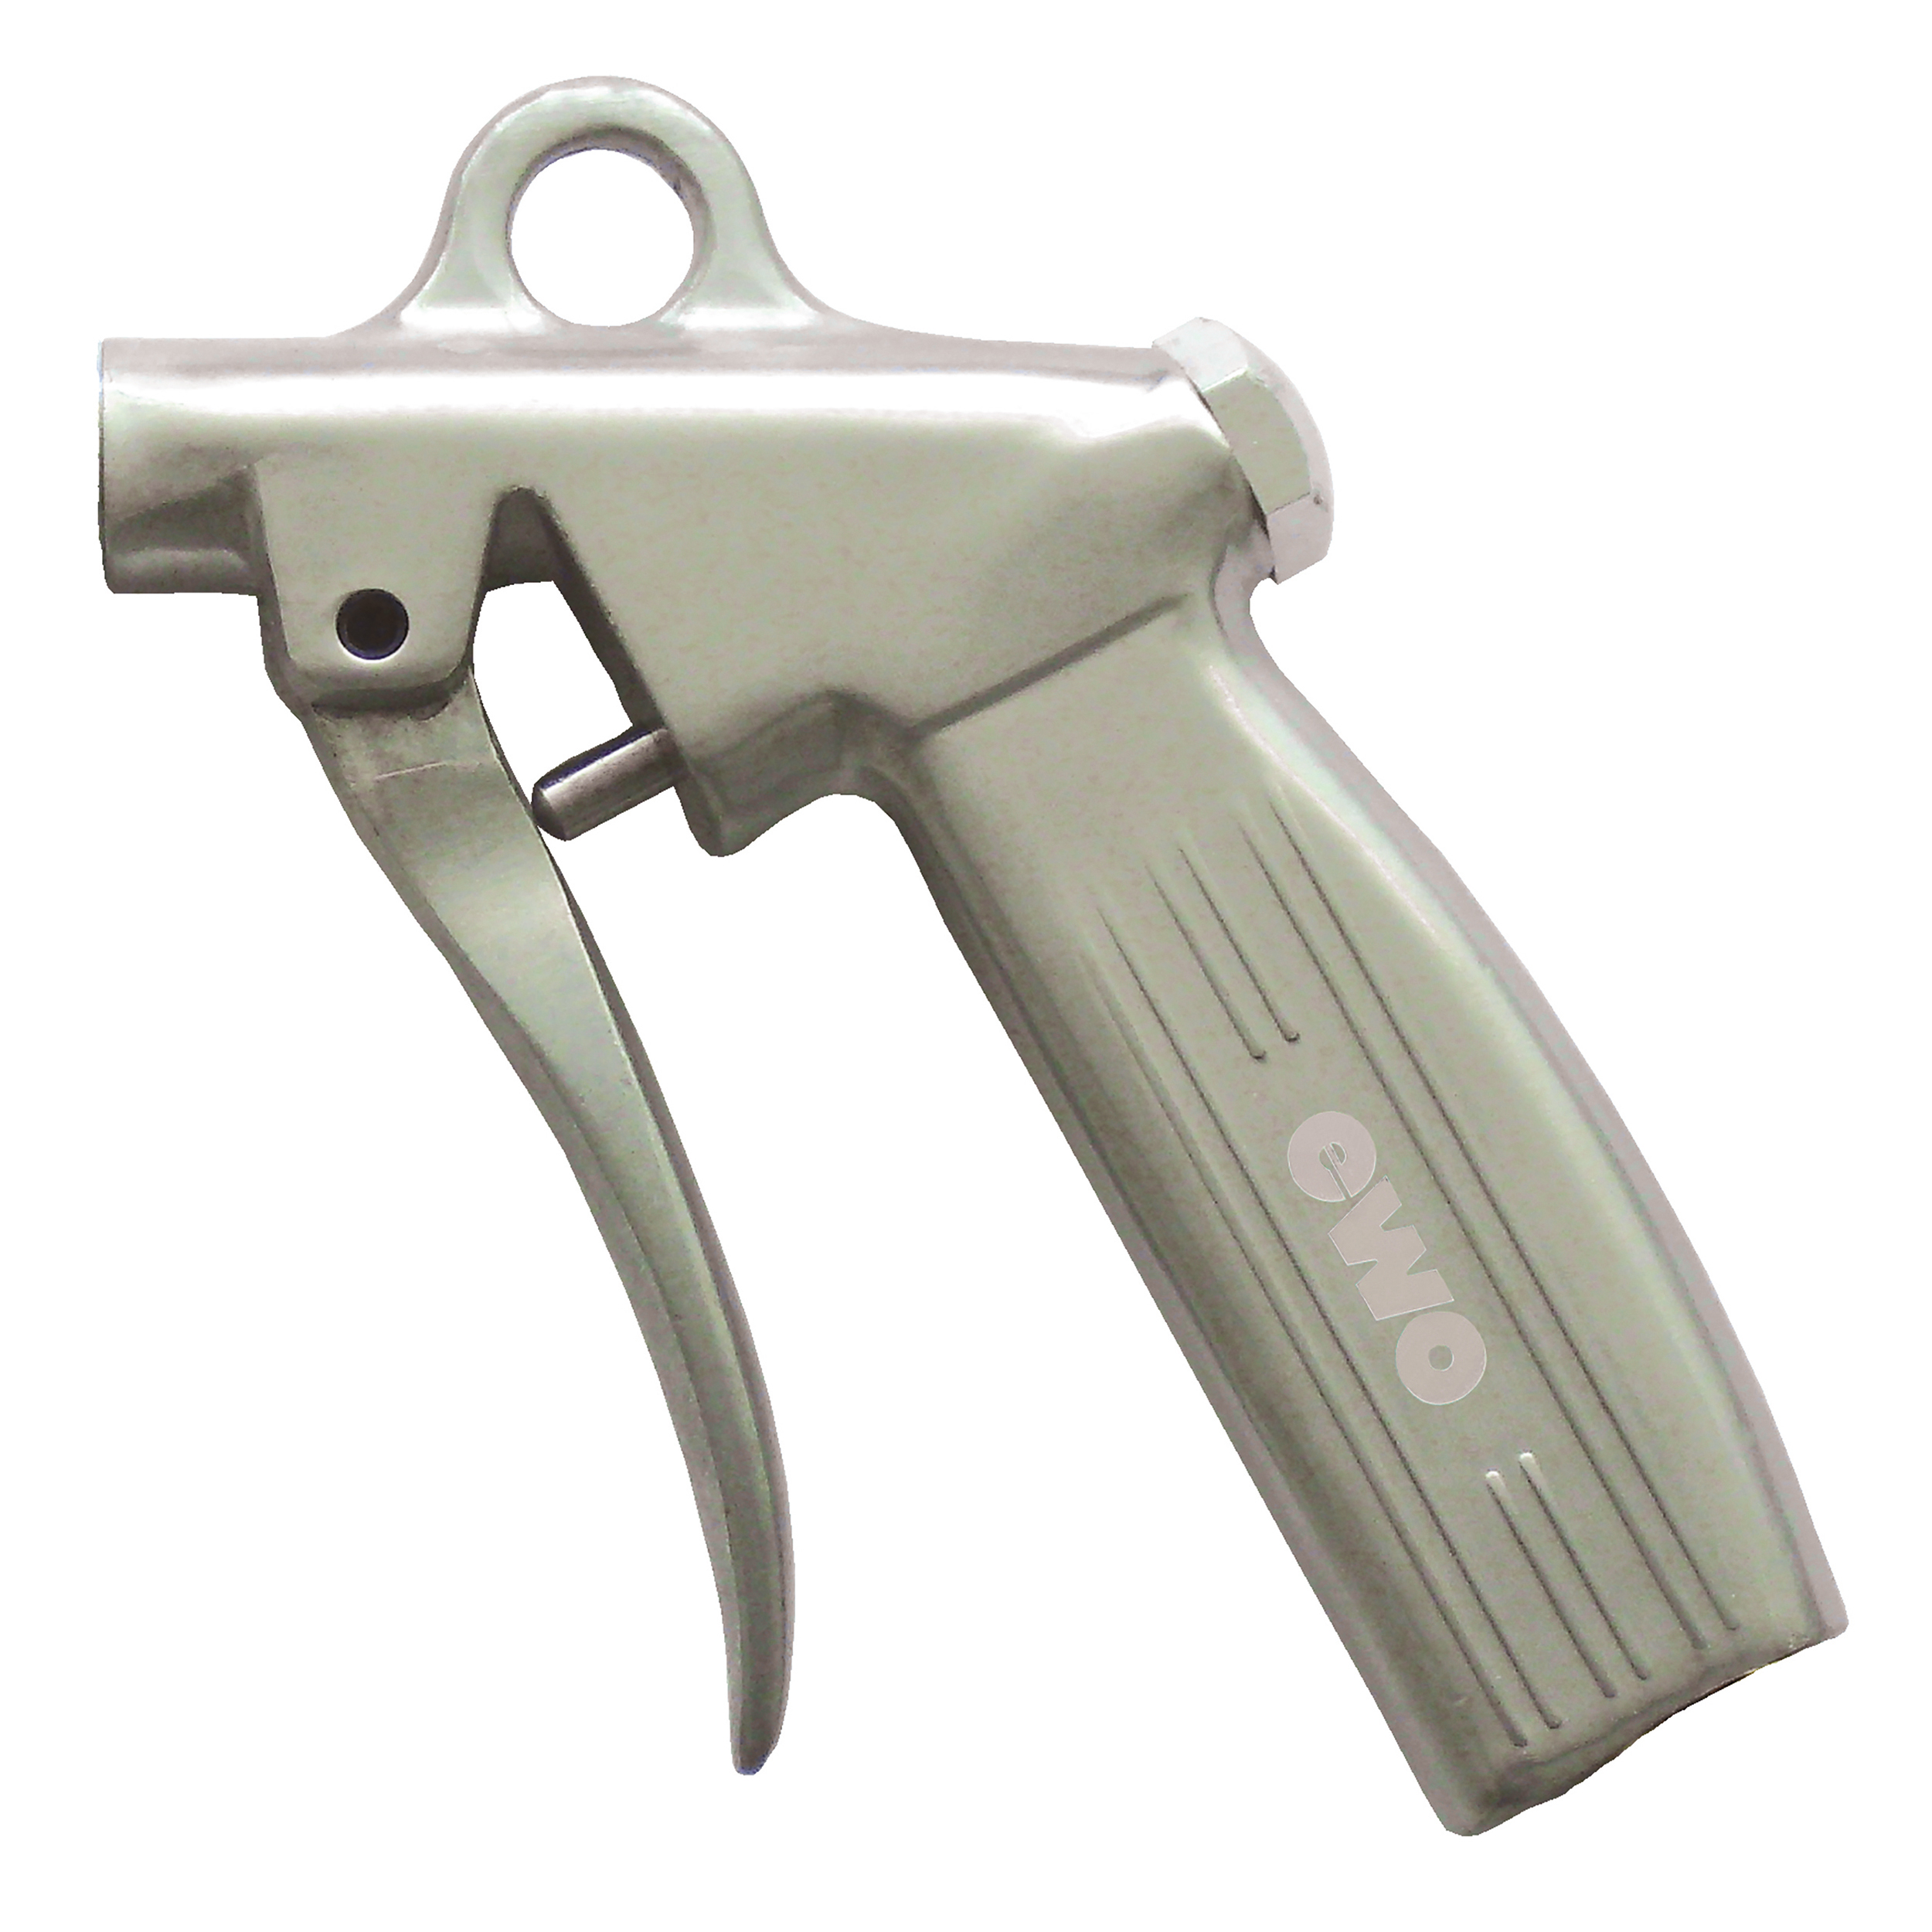 Blow gun, inlet: G¼ f, outlet: M12 × 1.25 f, aluminium, die-cast, max. 145 psi, recommended operating pressure: 29–116 psi, 240 g